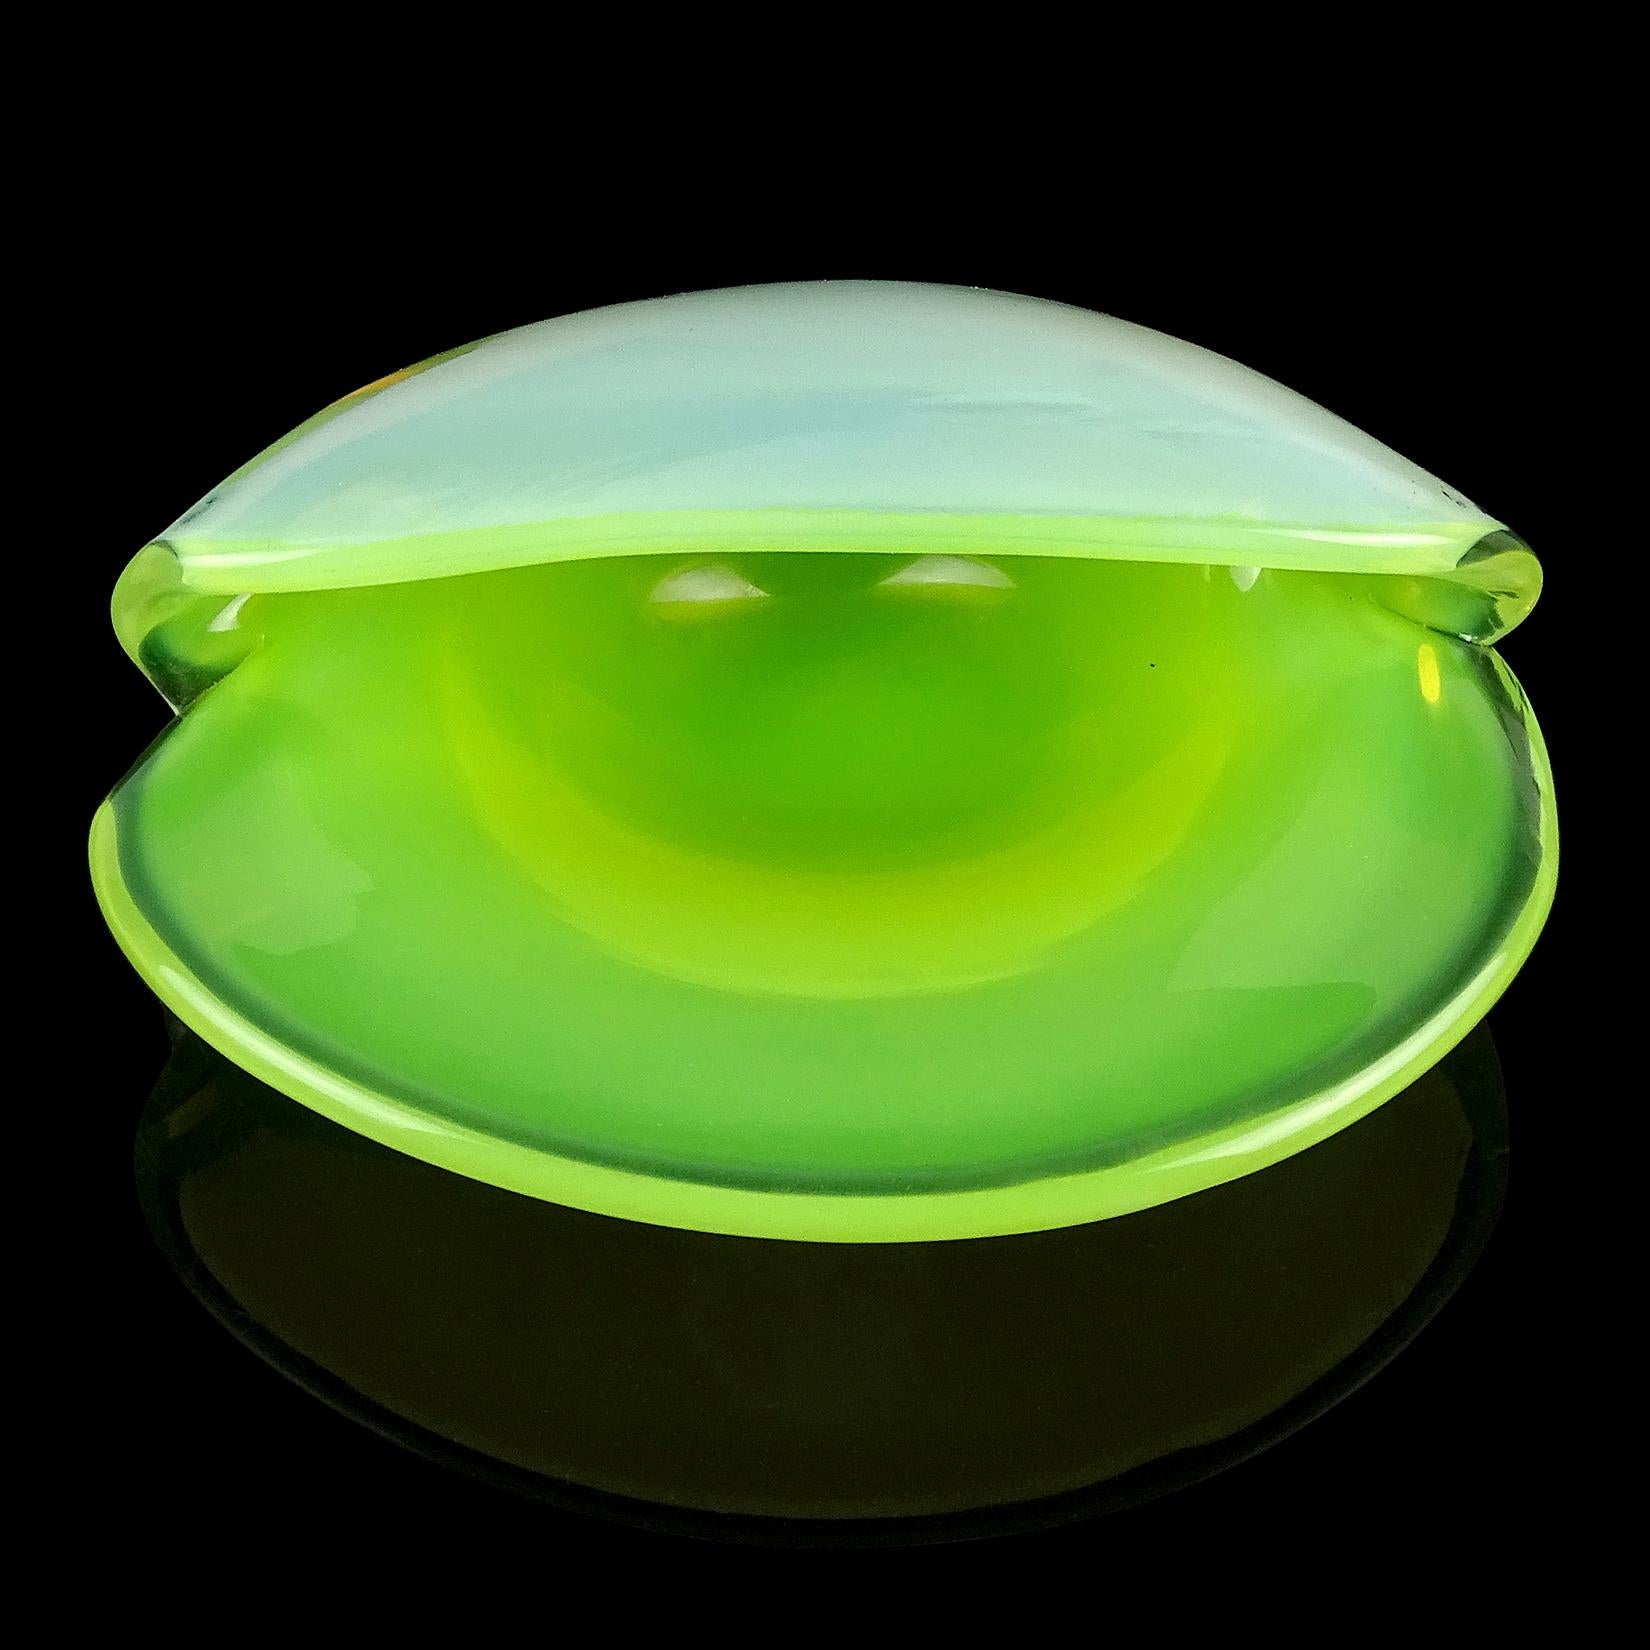 Beautiful vintage Murano hand blown opalescent white and yellow green Italian art glass clam shell decorative bowl. Documented to the Cenedese Company. Would make a great display piece on any vanity or desk. The seashell could be used as a catchall,